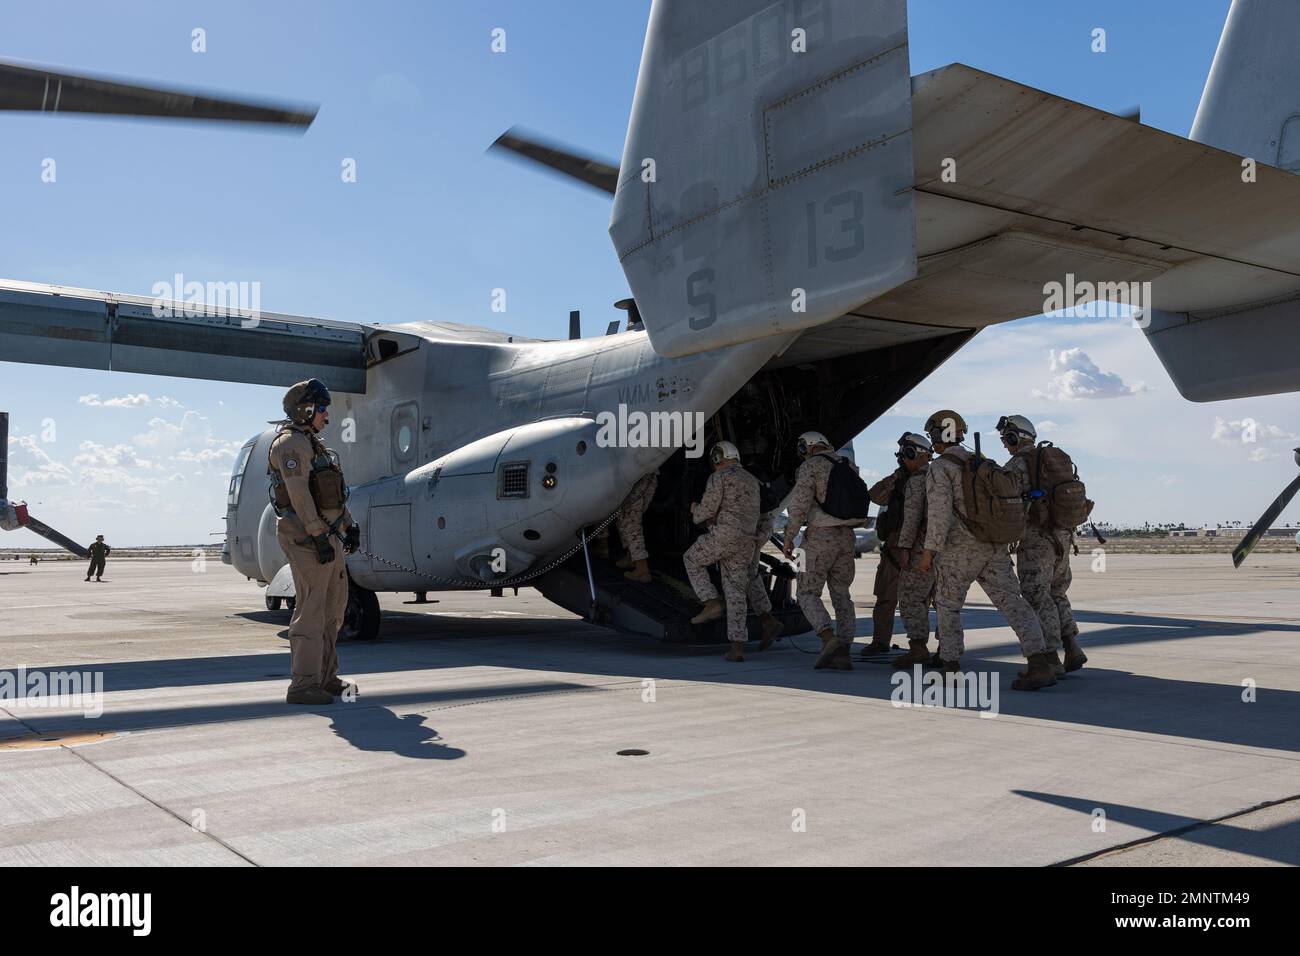 U.S. Marines assigned to Marine Aviation Weapons and Tactics Squadron One (MAWTS-1) embark an MV-22B Osprey during Weapons and Tactics Instructors (WTI) course 1-23 at Marine Corps Air Station Yuma, Arizona, Oct. 5, 2022. WTI is a seven-week training event hosted by MAWTS-1, providing standardized advanced tactical training and certification of unit instructor qualifications to support Marine aviation training and readiness, and assists in developing and employing aviation weapons and tactics. Stock Photo